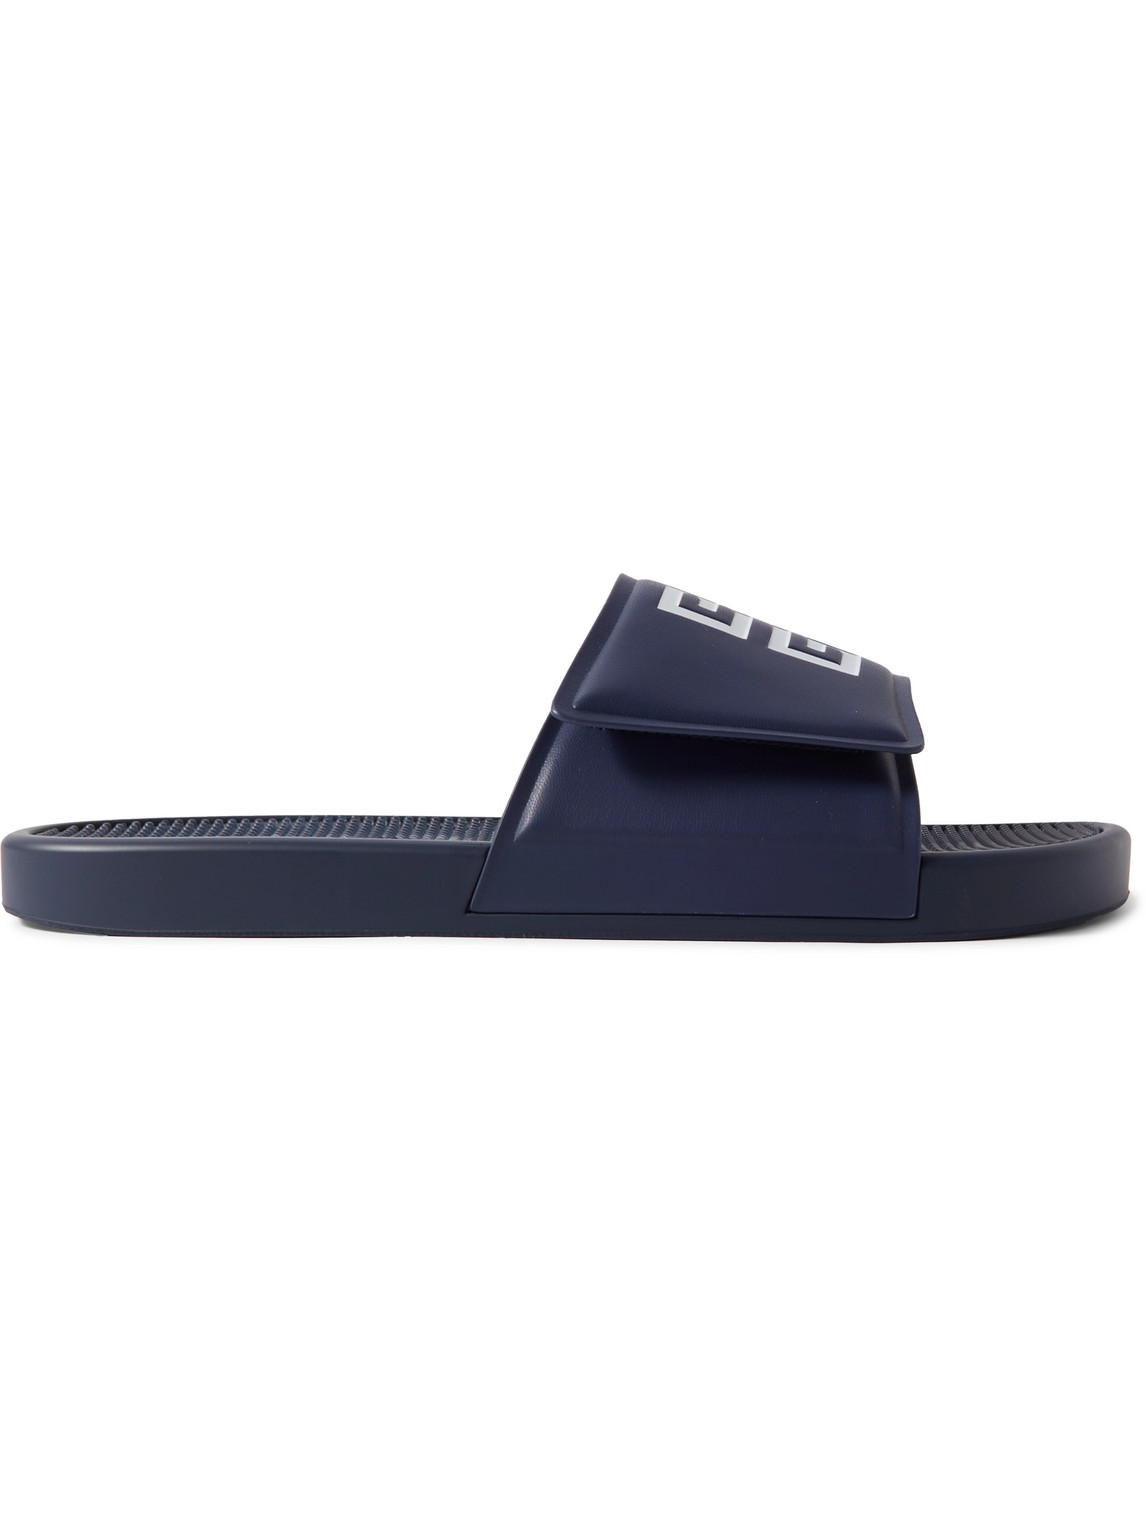 GIVENCHY LOGO-PRINT DEBOSSED FAUX LEATHER SLIDES